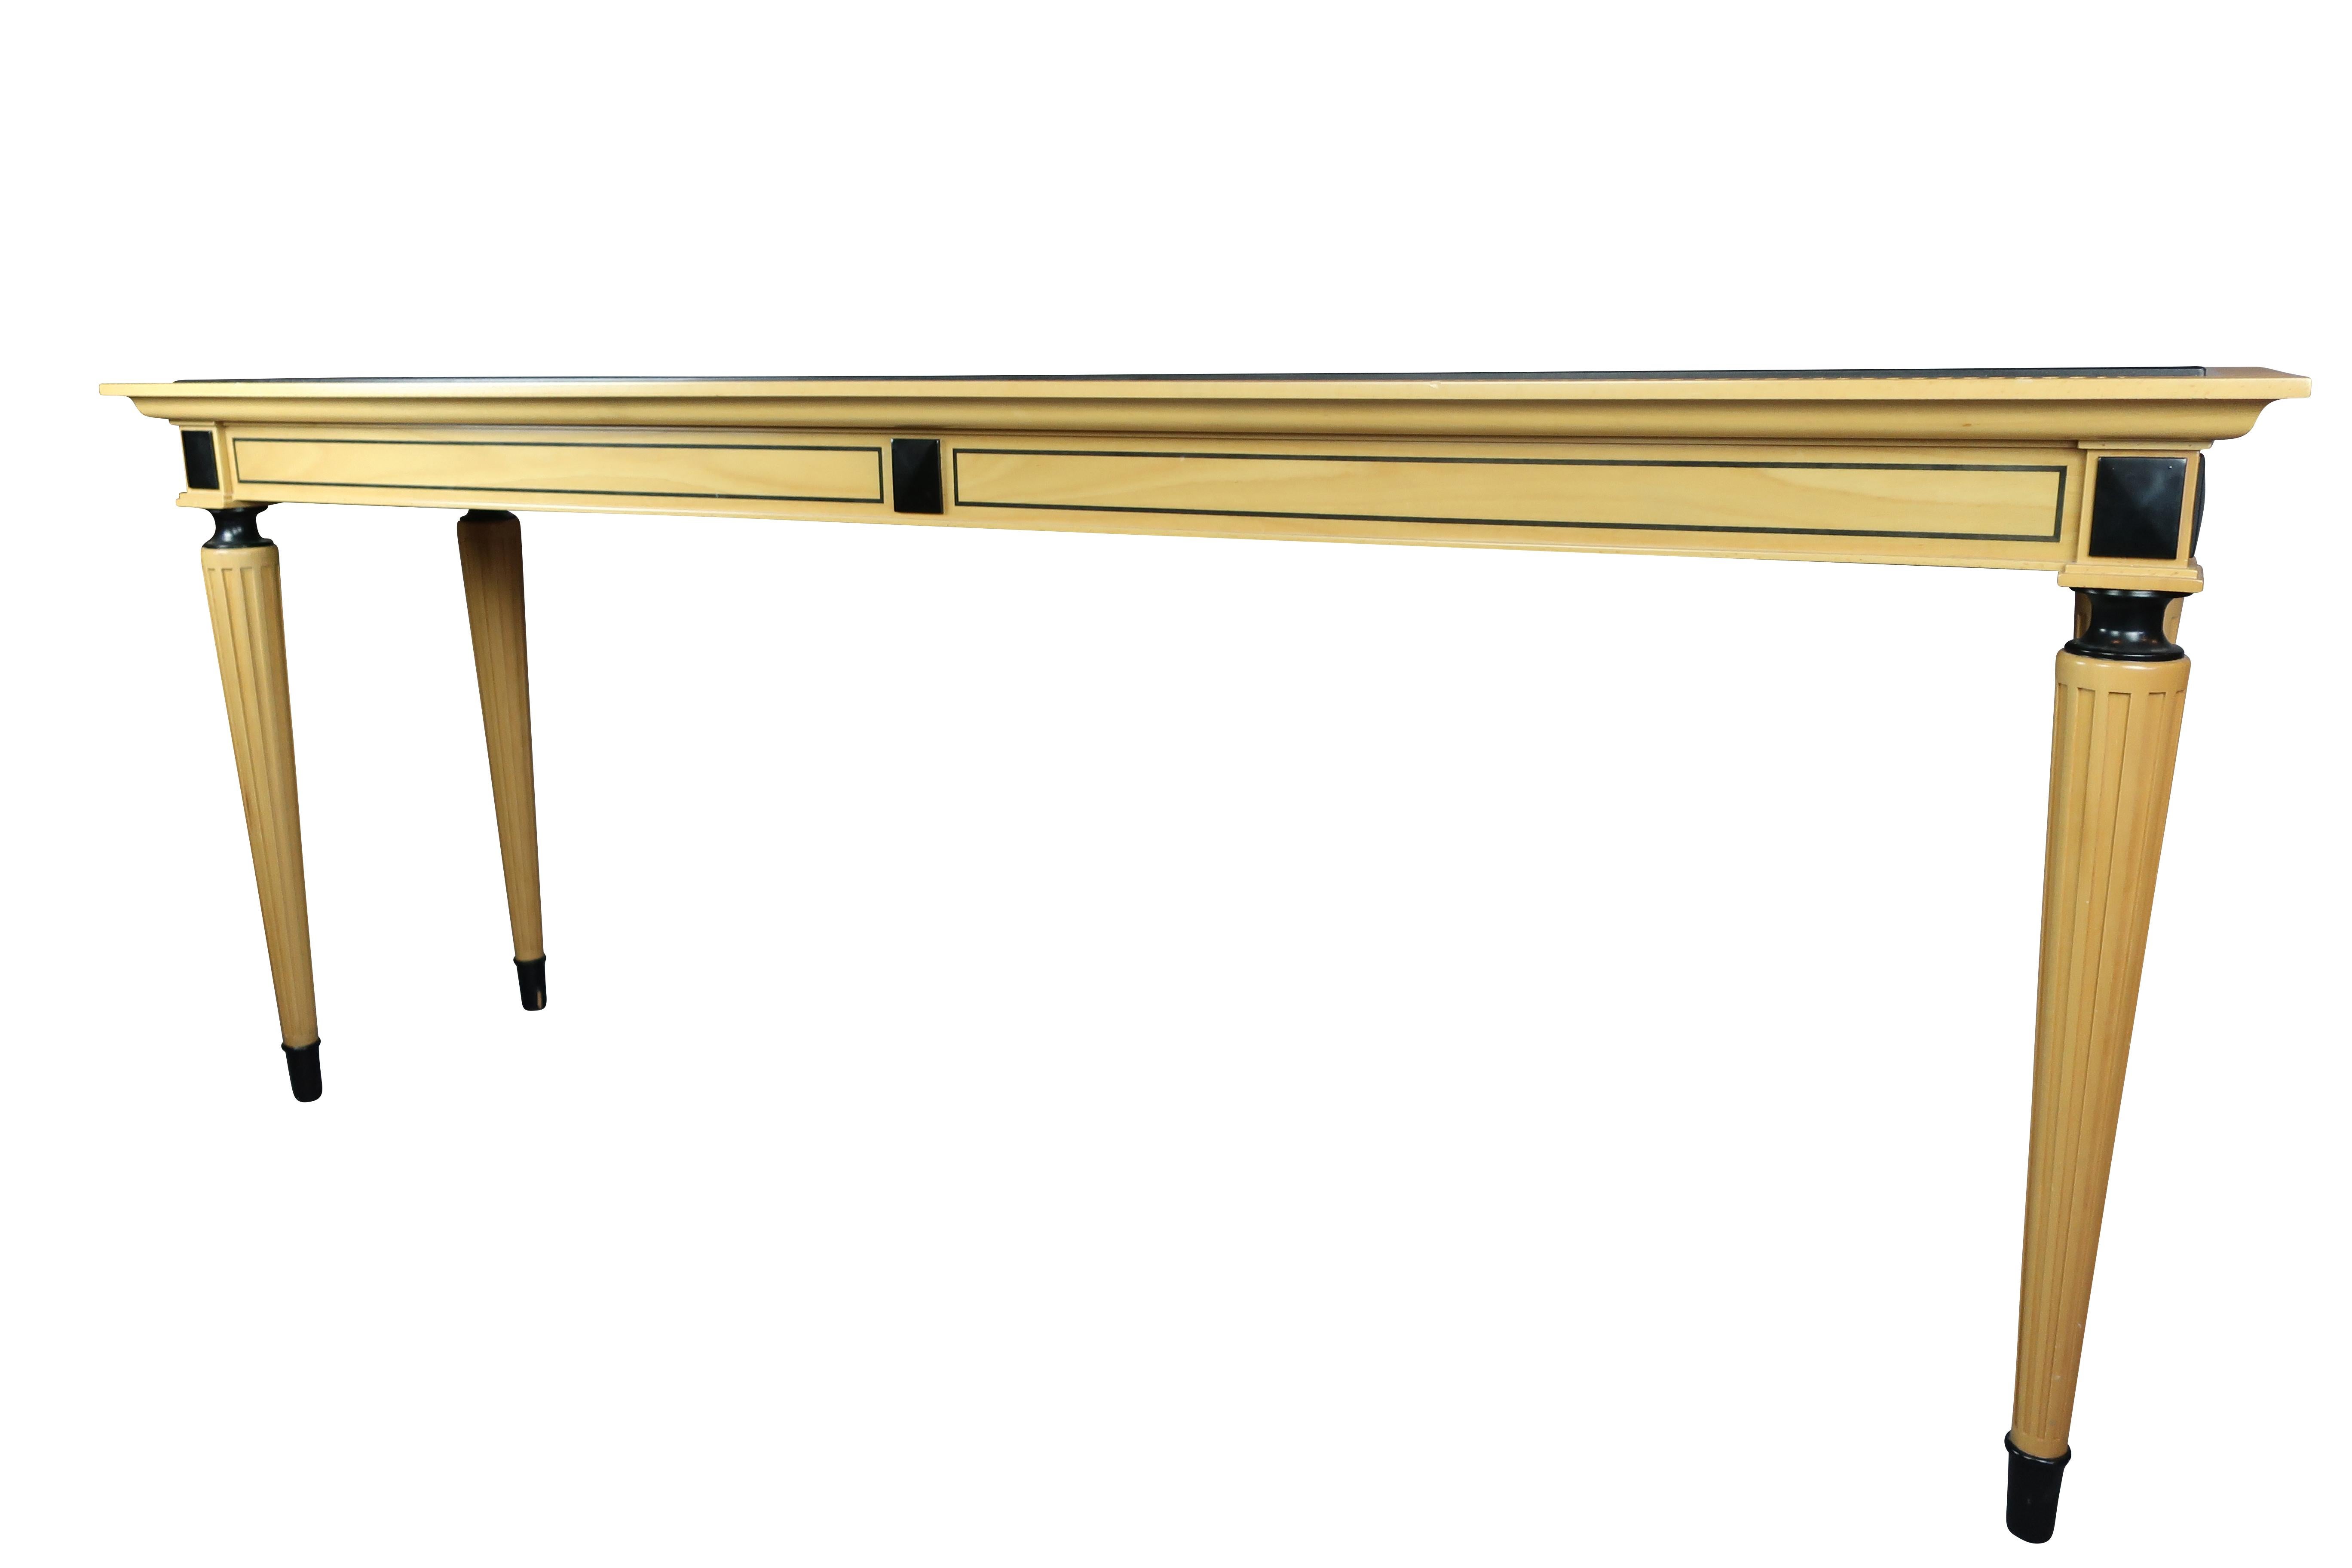 Neoclassical David Linley British Mid-Century Modern Marble-Top Satinwood Console Table